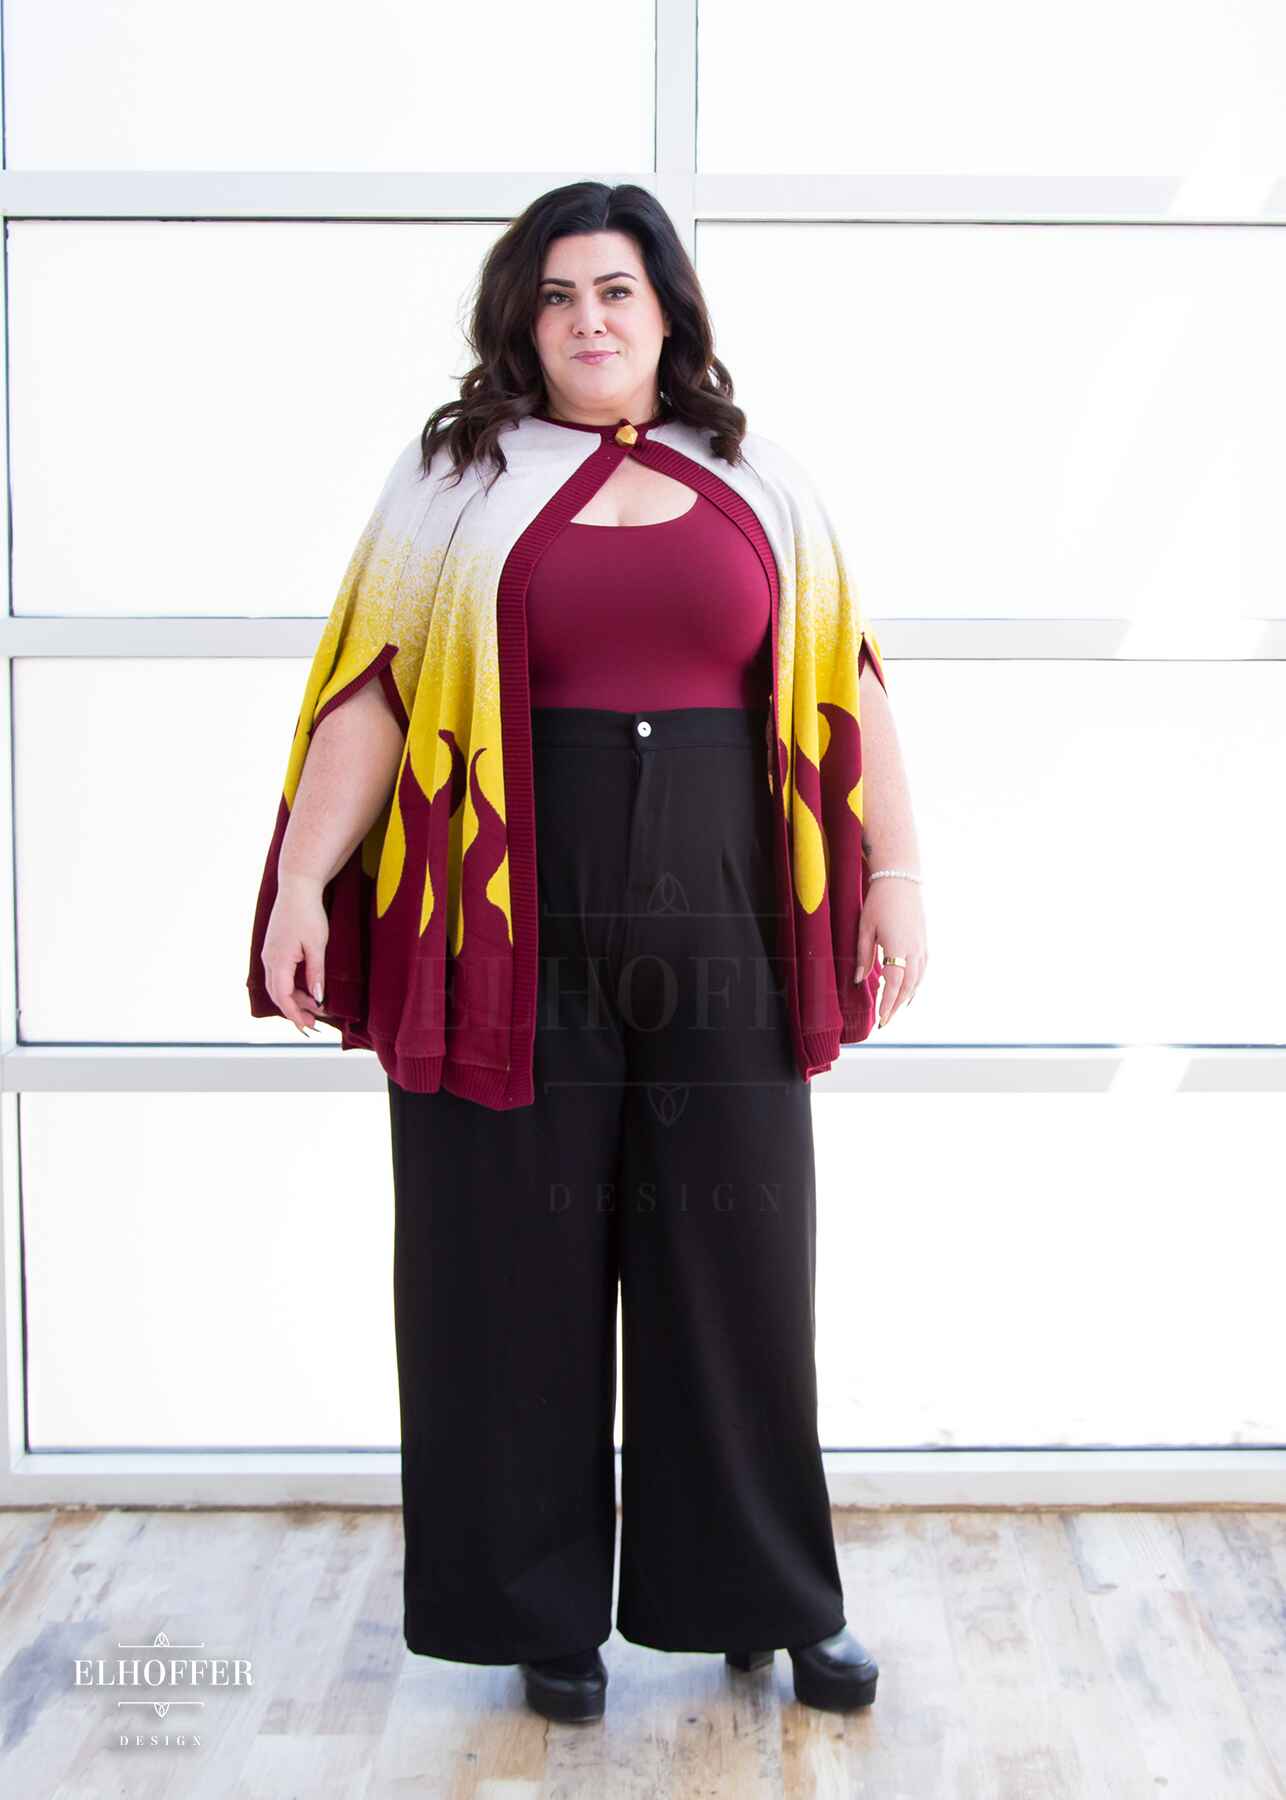 Stacy, a light skinned XL model with shoulder length wavy dark brown hair, is wearing a below hip length knit cape. The cape is a gradient of color from white at the shoulders, to yellow, to a red fire design at the bottom, it also has a button closer at the neck, and armholes in the side seam. She paired the cape with a burgundy scoop neck crop top and black pleated trousers.